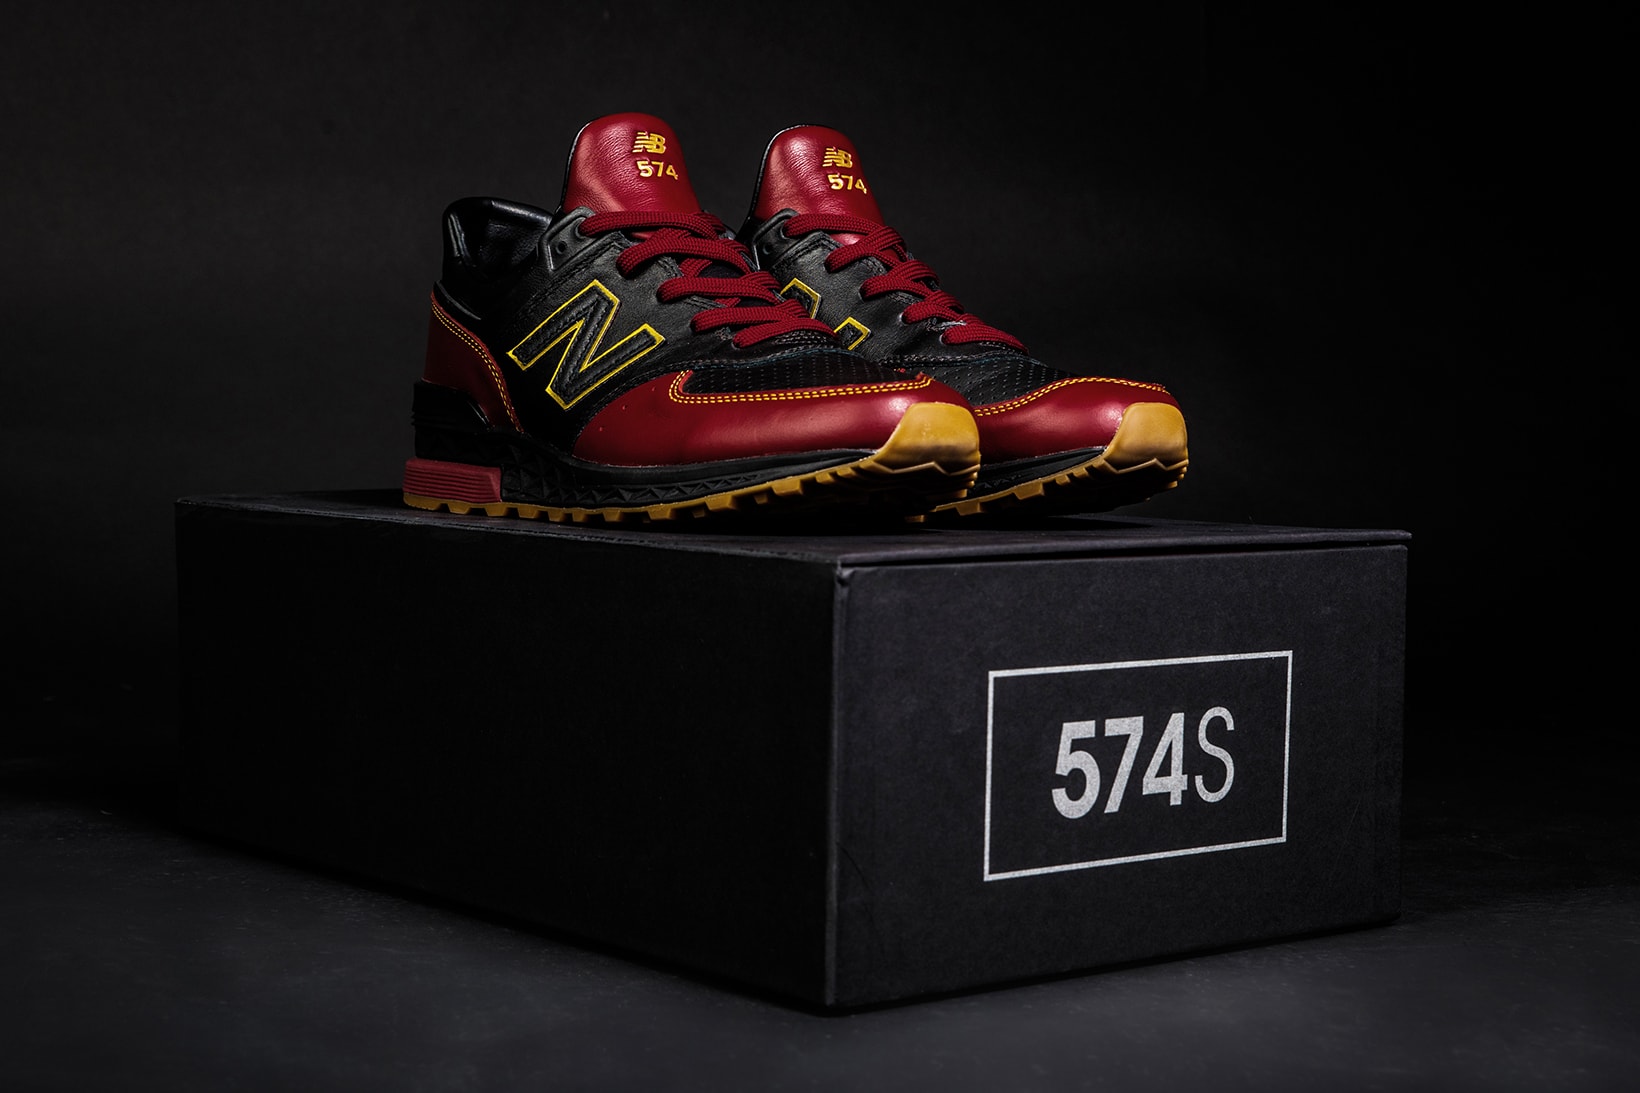 New Balance 574 Sport Limited EDT Vault Collaboration Singapore Exclusive Box 10 year anniversary